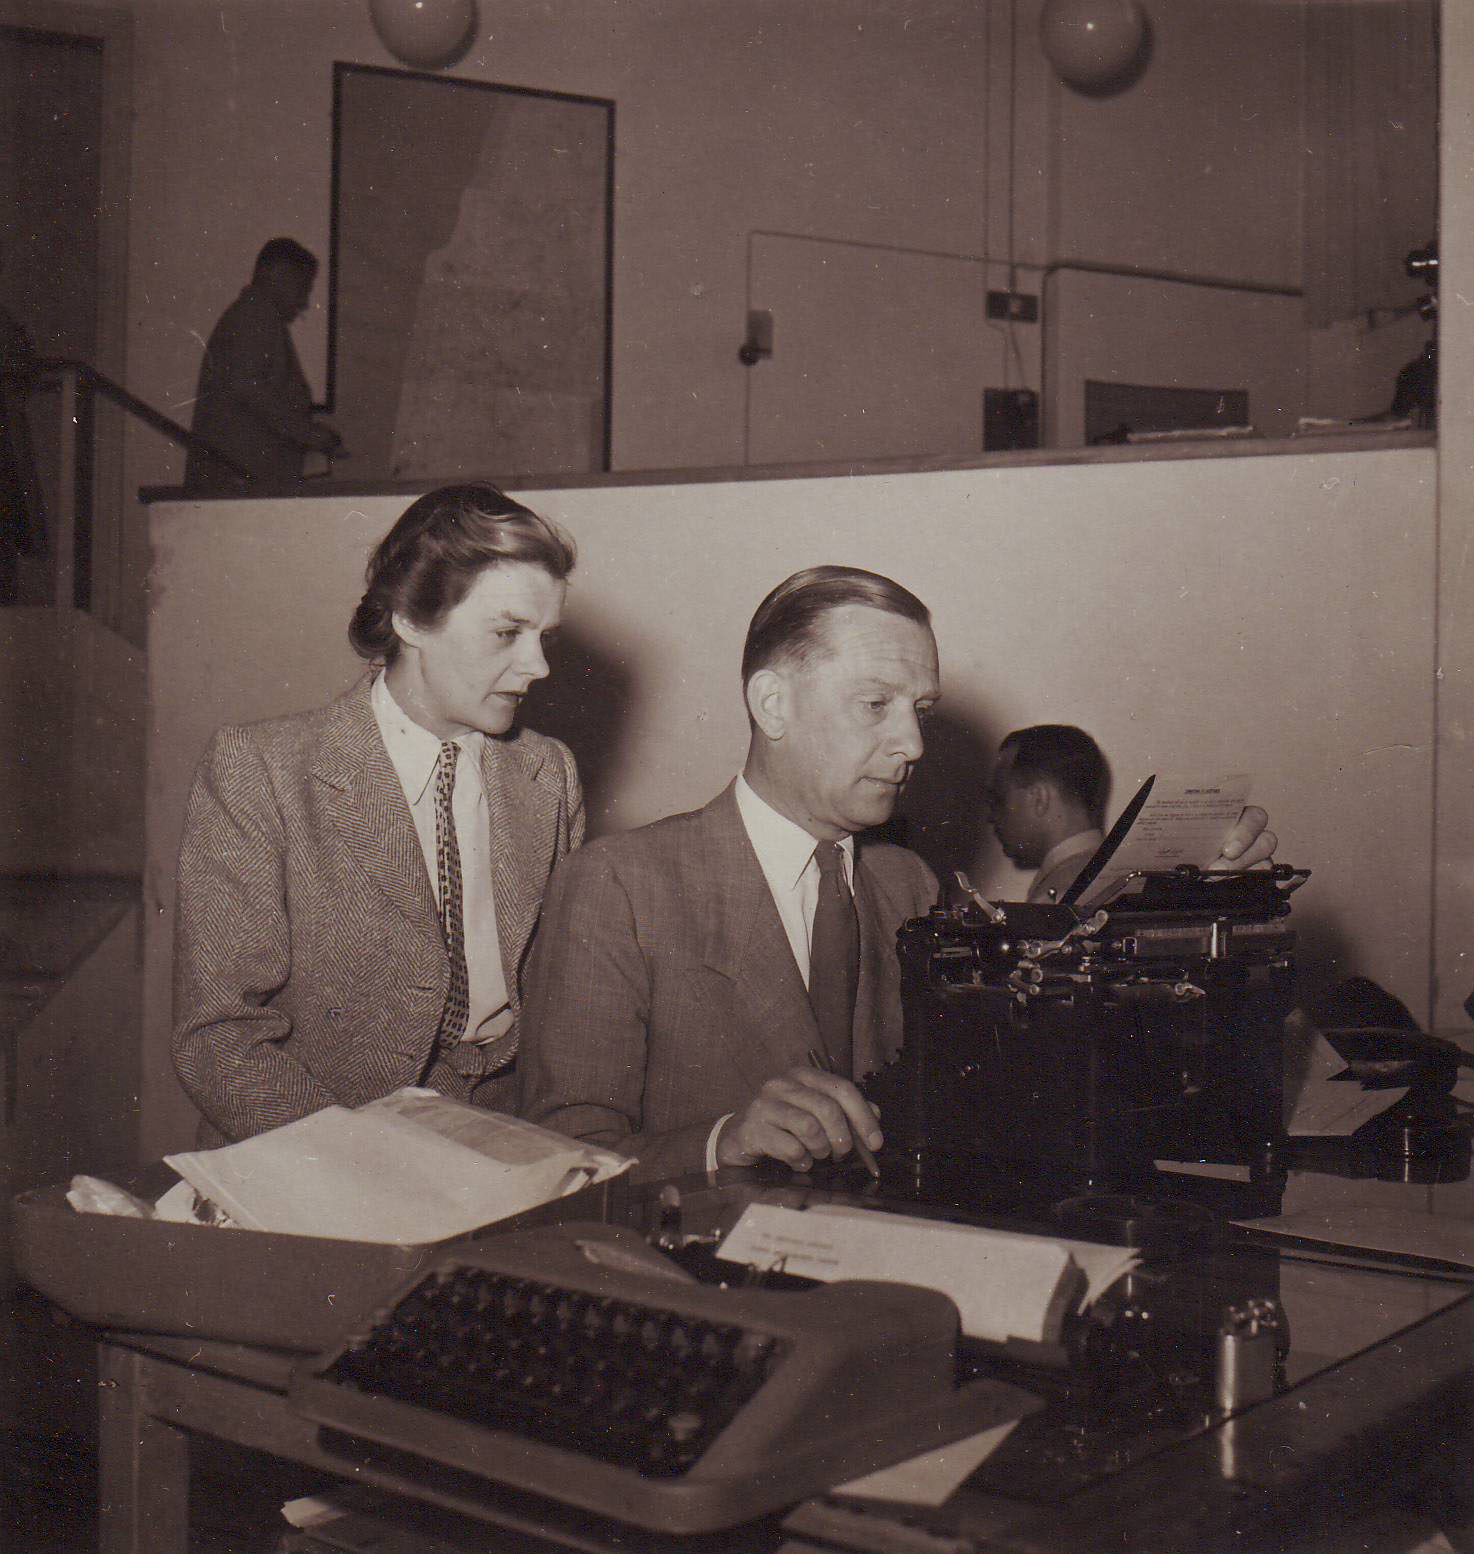 Clare Hollingworth and fiancé, later husband, Geoffrey Hoare at the press center in Palestine, prior to foundation of state of Israel, in the late 1940s (Clare Hollingworth Collection)